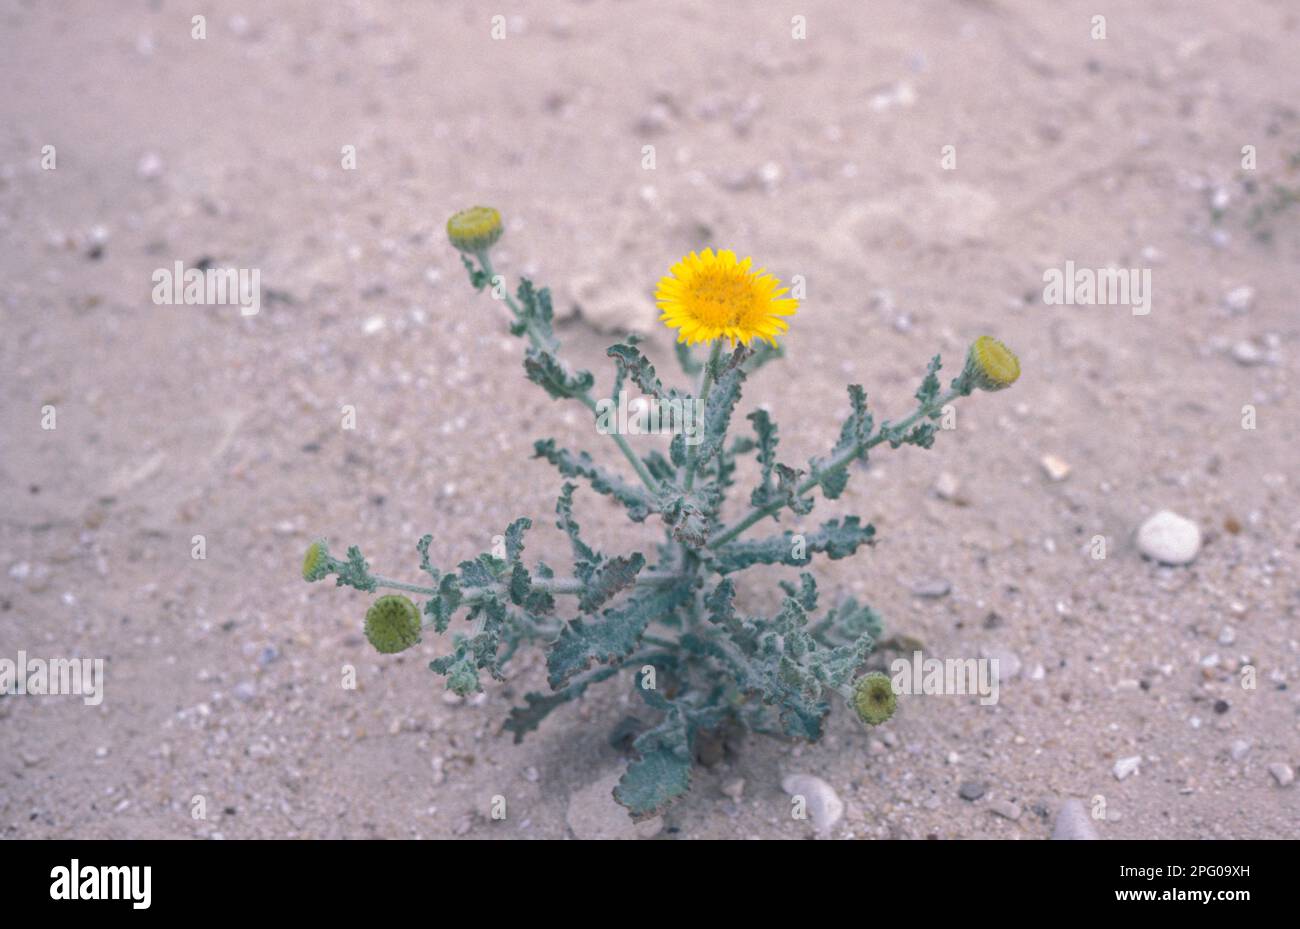 Parosheet Galonite (Pulicaria desertorum) is a low-lying plant with yellow flowers that grows in desert areas. The leaves and flowers can be used to Stock Photo